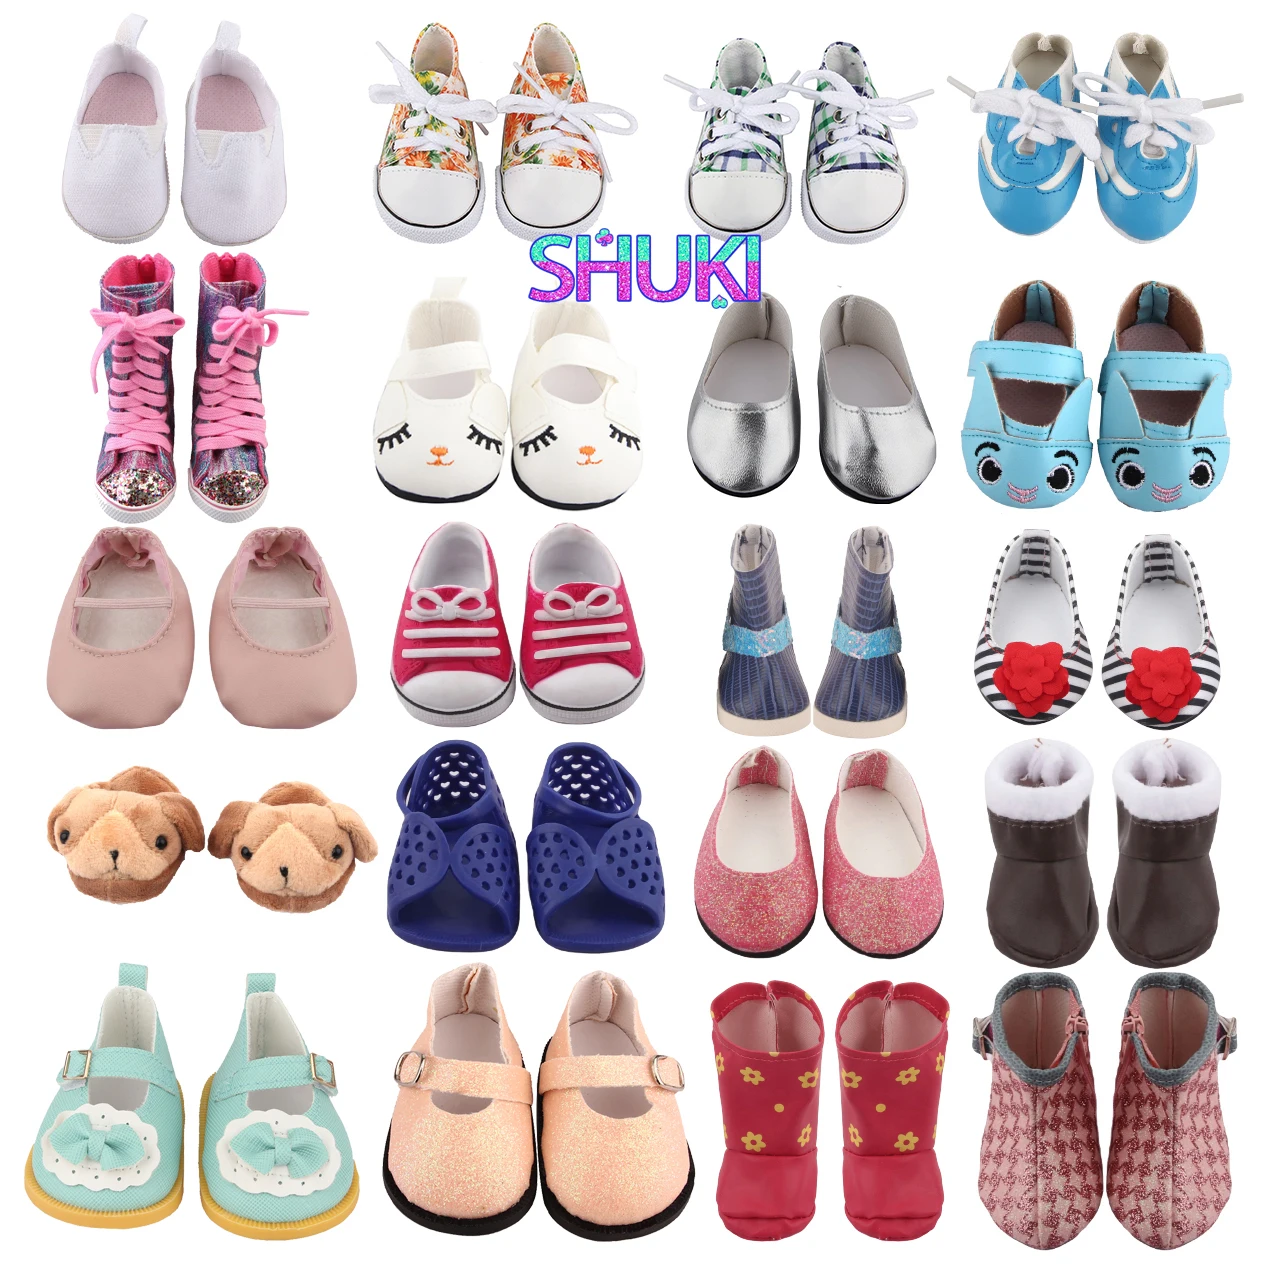 

7cm Canvas Cloth Doll Shoes Lace-up Doll Boots Sneakers For 43cm Baby New Born&18 inch American,OG Life Girl Doll Girl's Gift